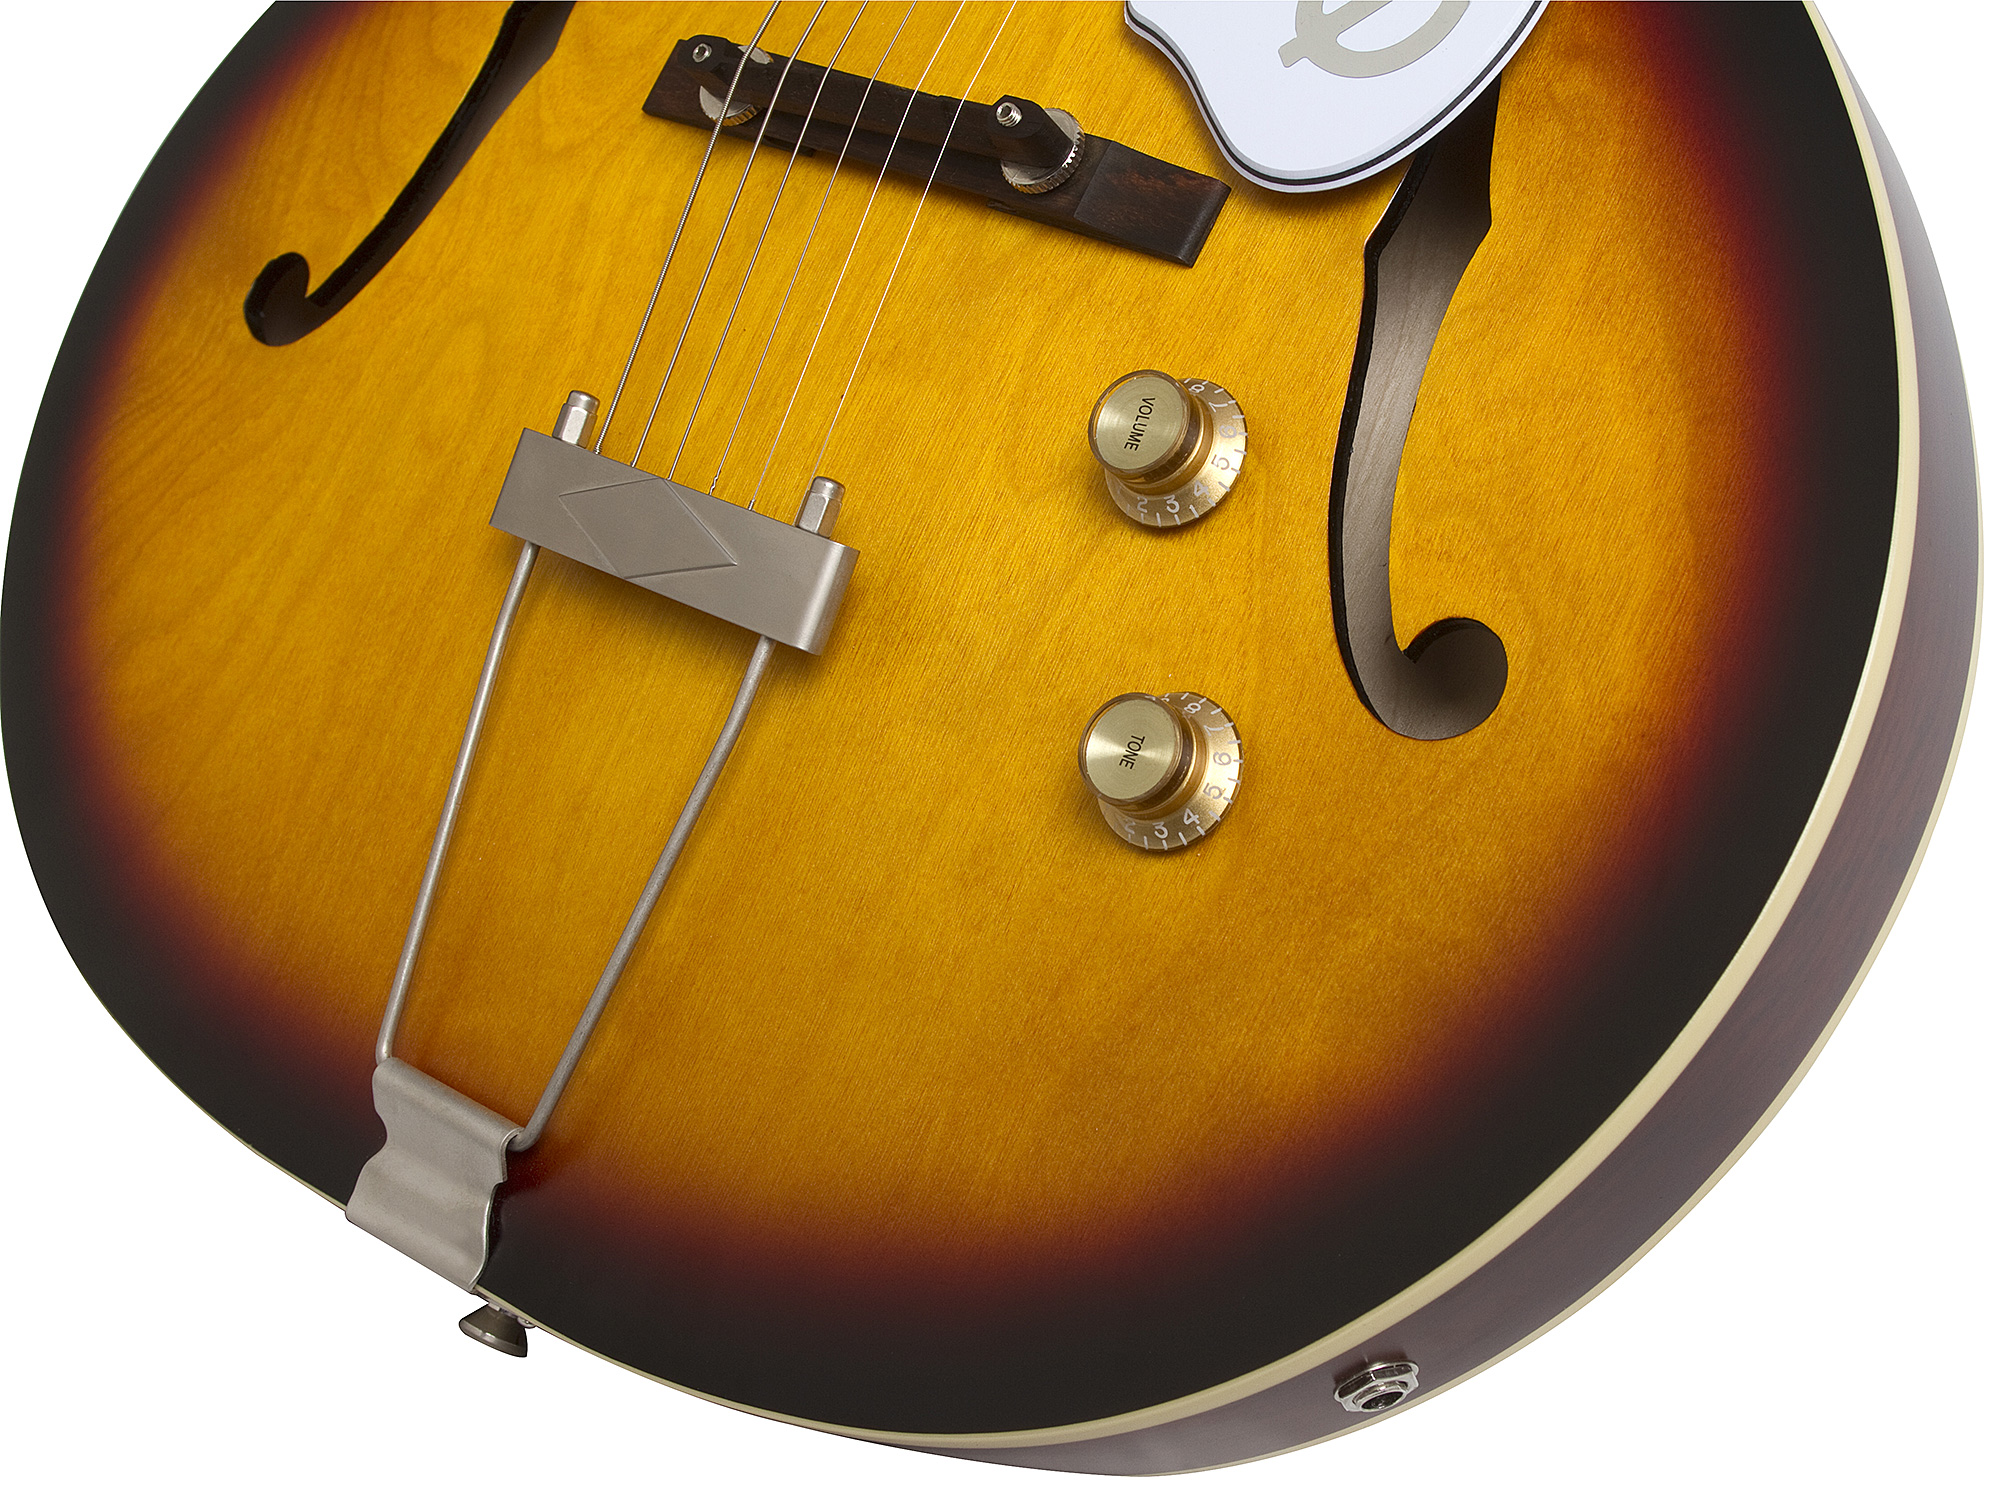 Epiphone Inspired By 1966 Century 2016 - Aged Gloss Vintage Sunburst - Semi-hollow electric guitar - Variation 3